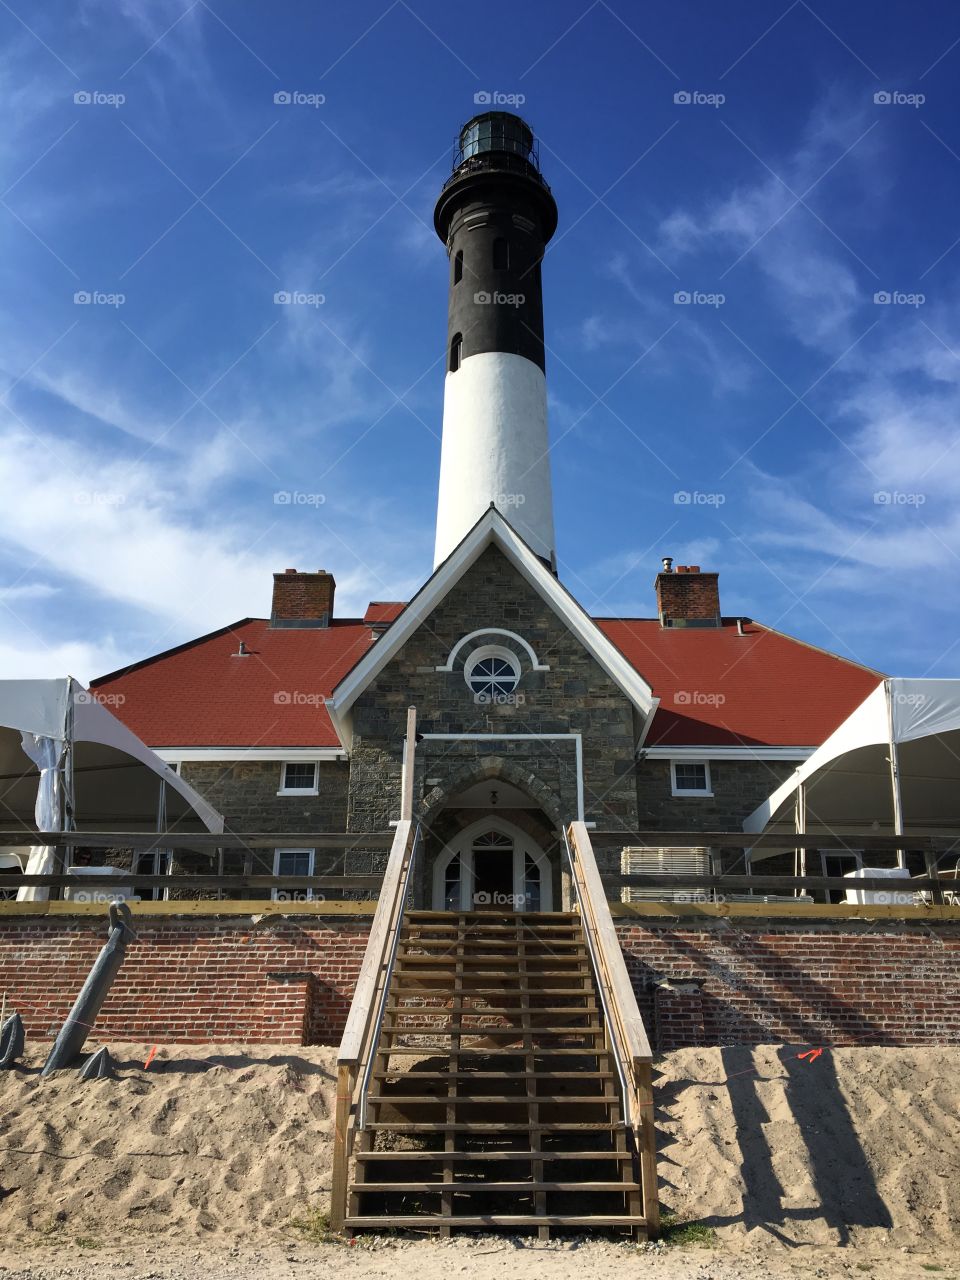 Fire Island Lighthouse... a beautiful place to visit in Long Island, NY - USA...